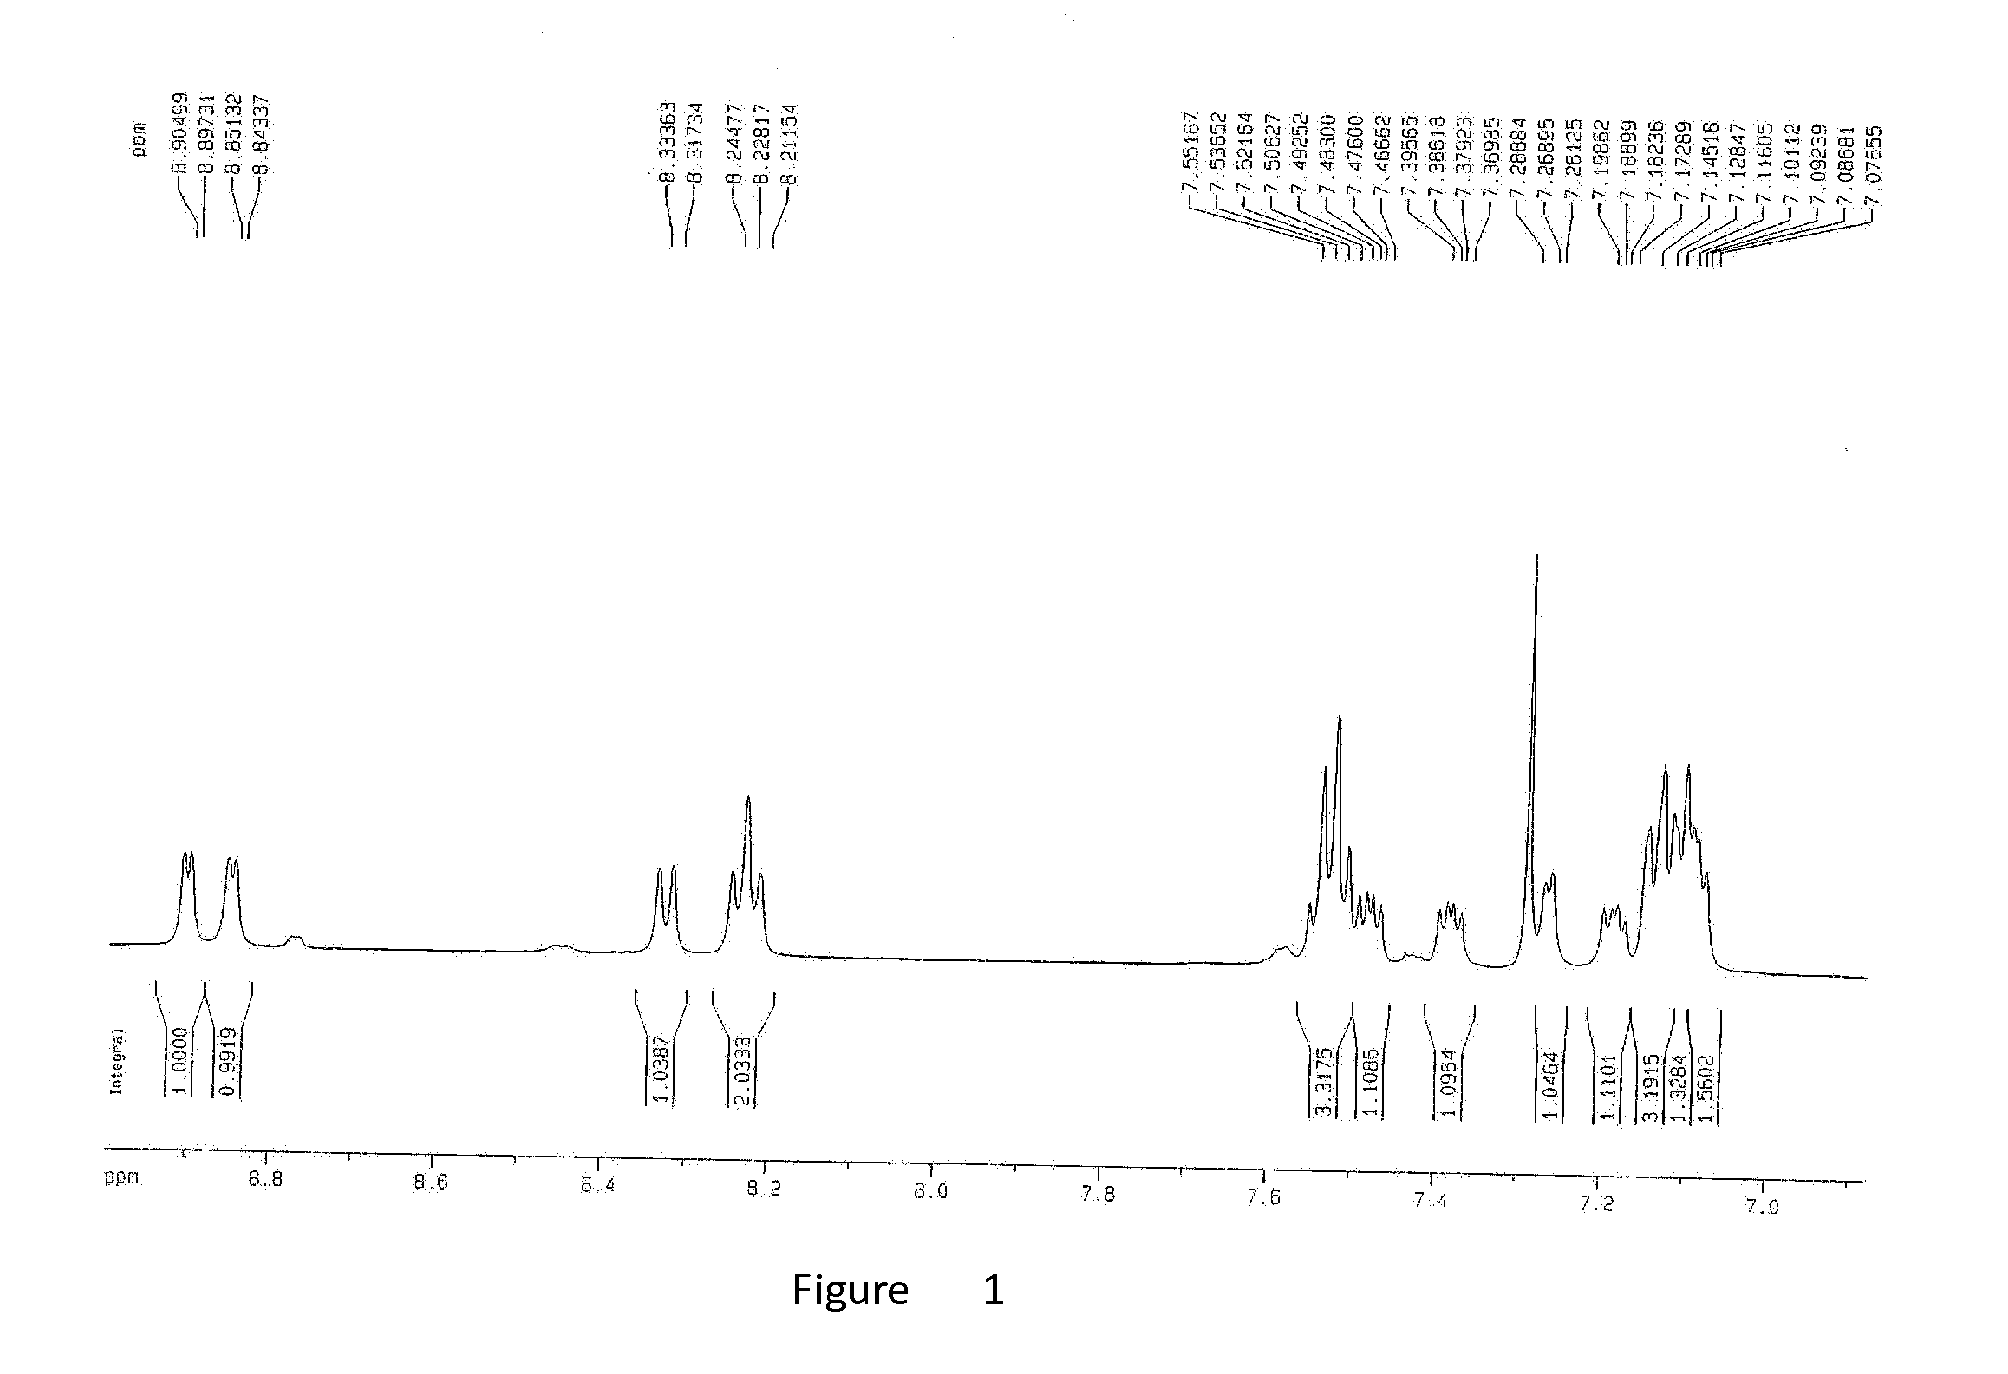 Method for Preparation Metal Compounds of 8-Hydroxyquinoline or Derivatives